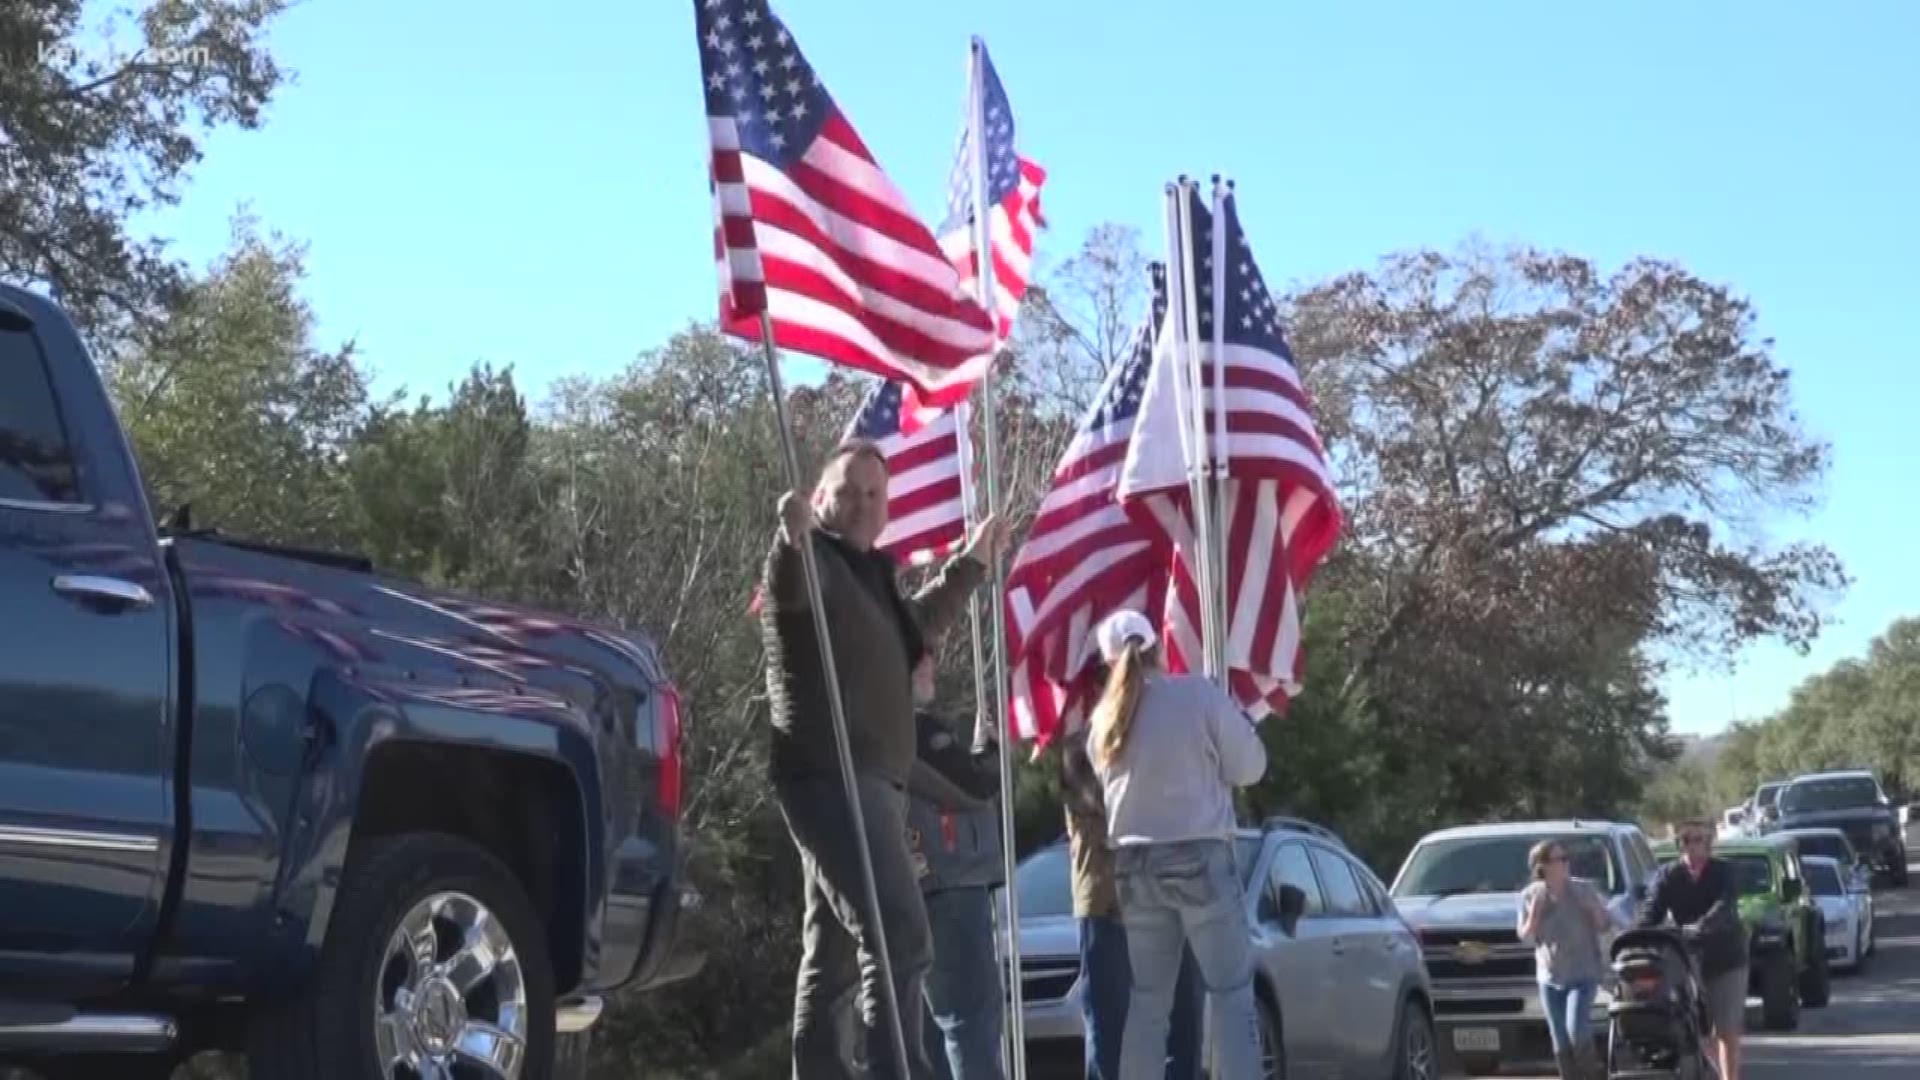 Hundreds came out to celebrate as an army specialist and his wife received a Christmas gift unlike any other. Eyewitness News reporter Ashley Speller explains.